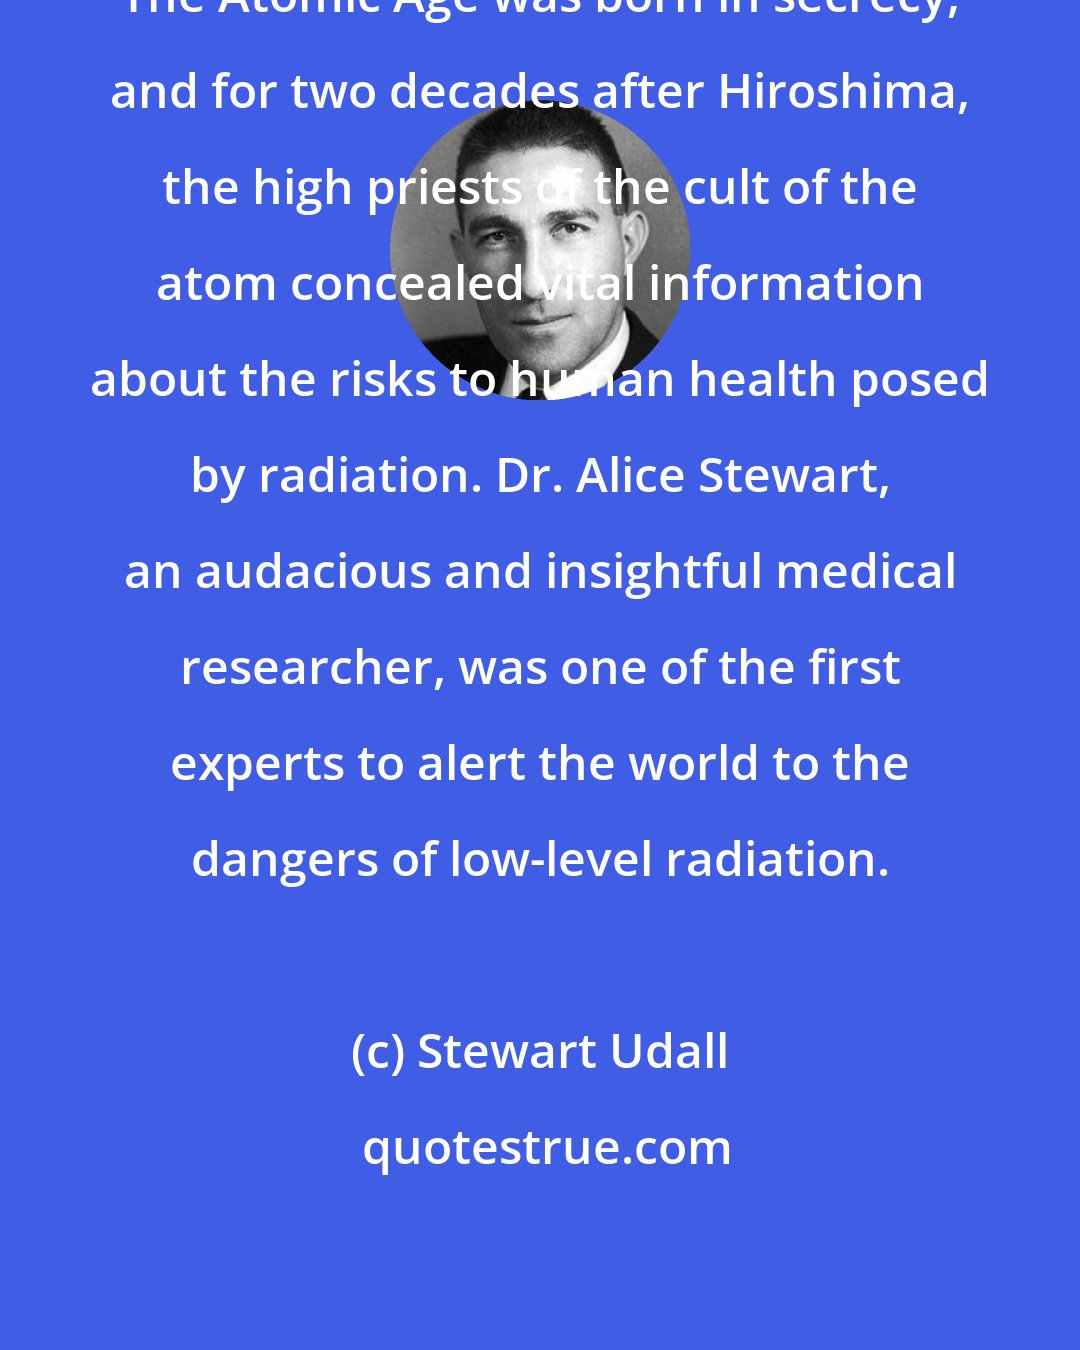 Stewart Udall: The Atomic Age was born in secrecy, and for two decades after Hiroshima, the high priests of the cult of the atom concealed vital information about the risks to human health posed by radiation. Dr. Alice Stewart, an audacious and insightful medical researcher, was one of the first experts to alert the world to the dangers of low-level radiation.